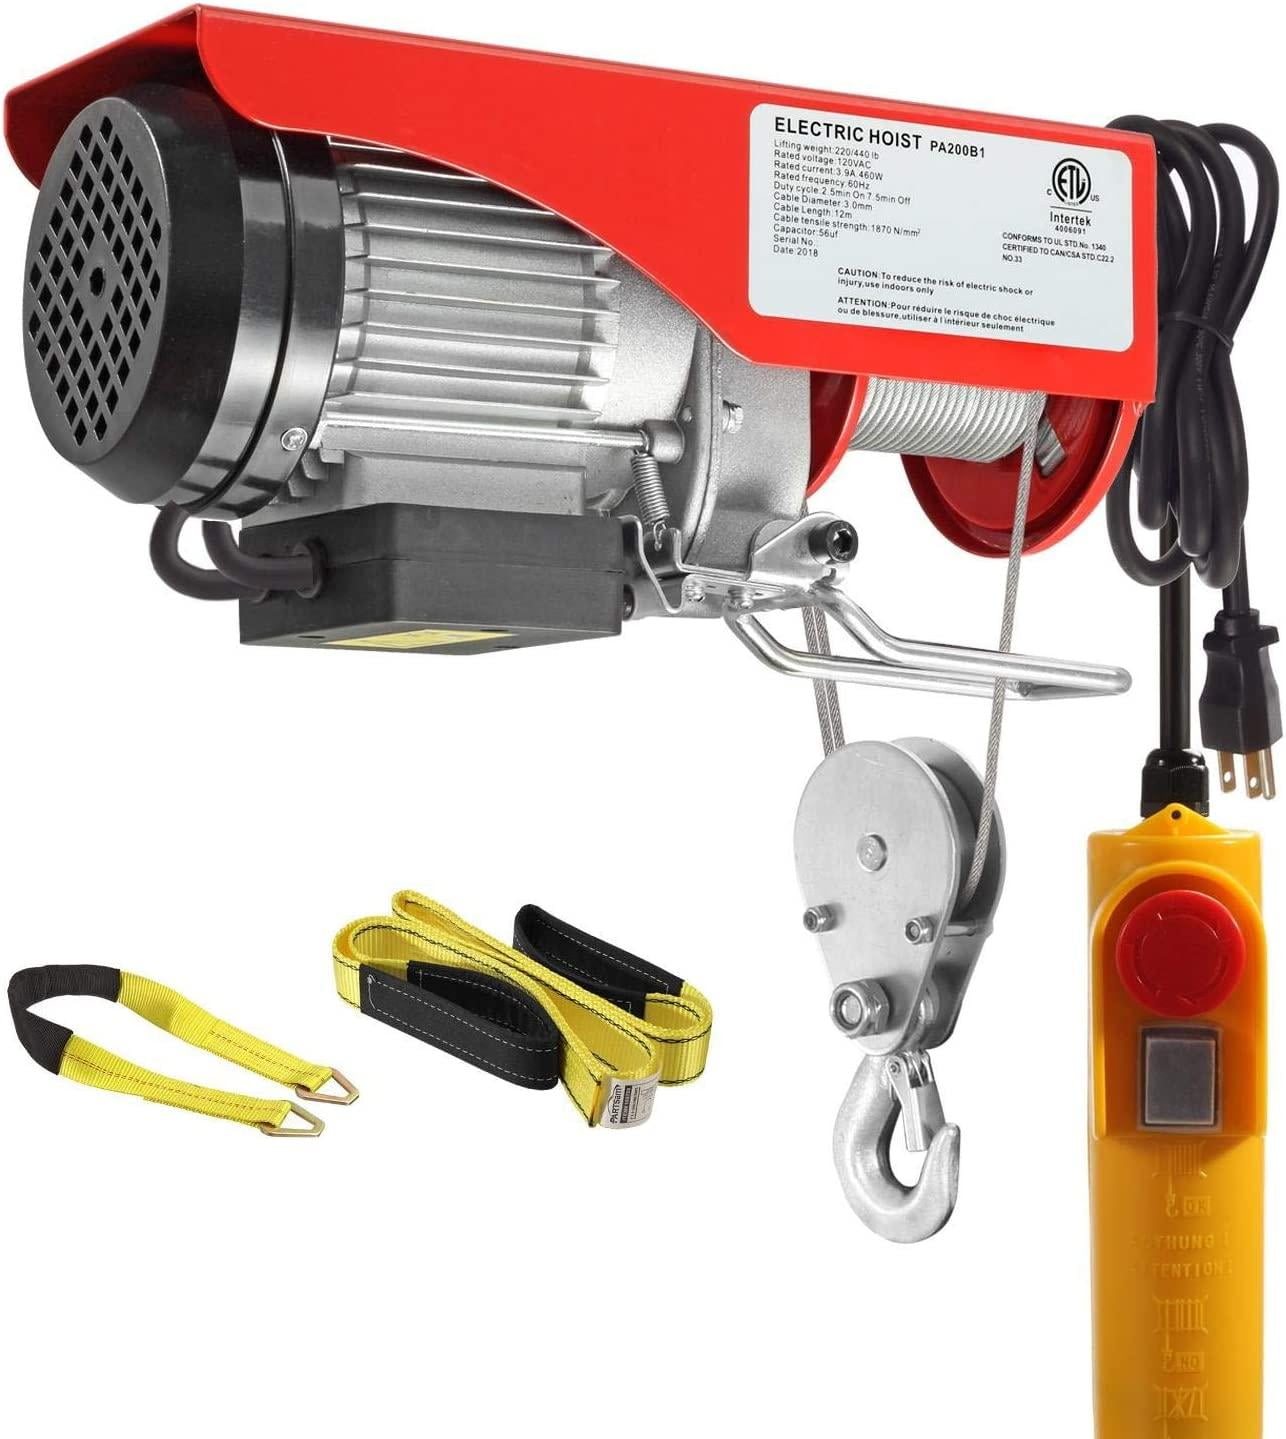 New 440LBS UL Approved Electricw/emergency button USA seller Hoist  Crane